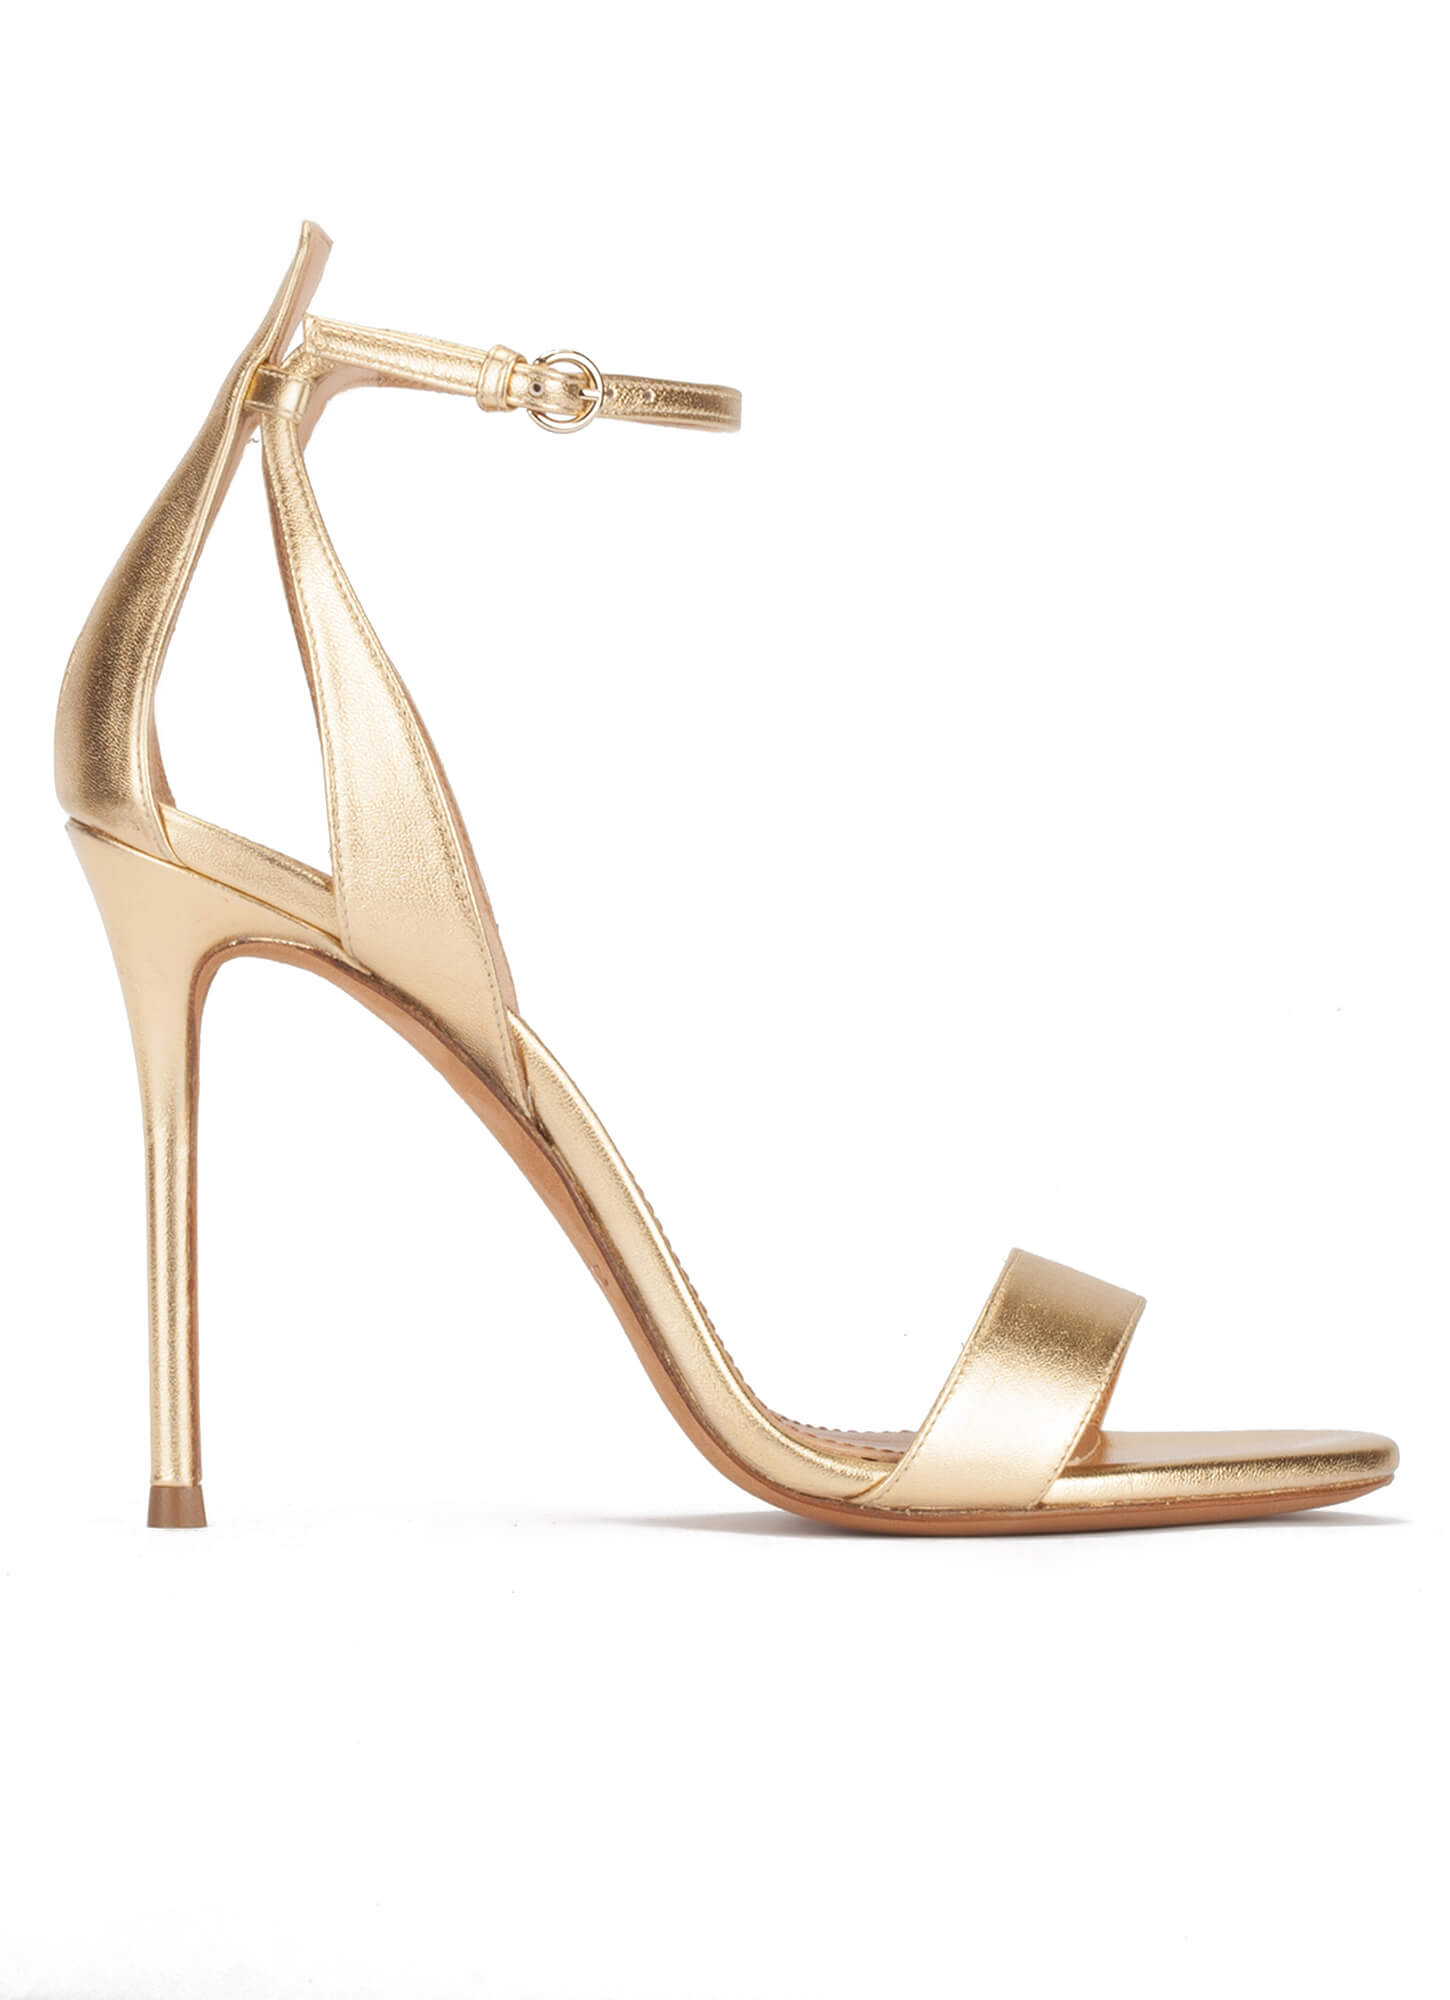 Ankle-strap high heeled sandals in gold metallic leather . PURA LOPEZ